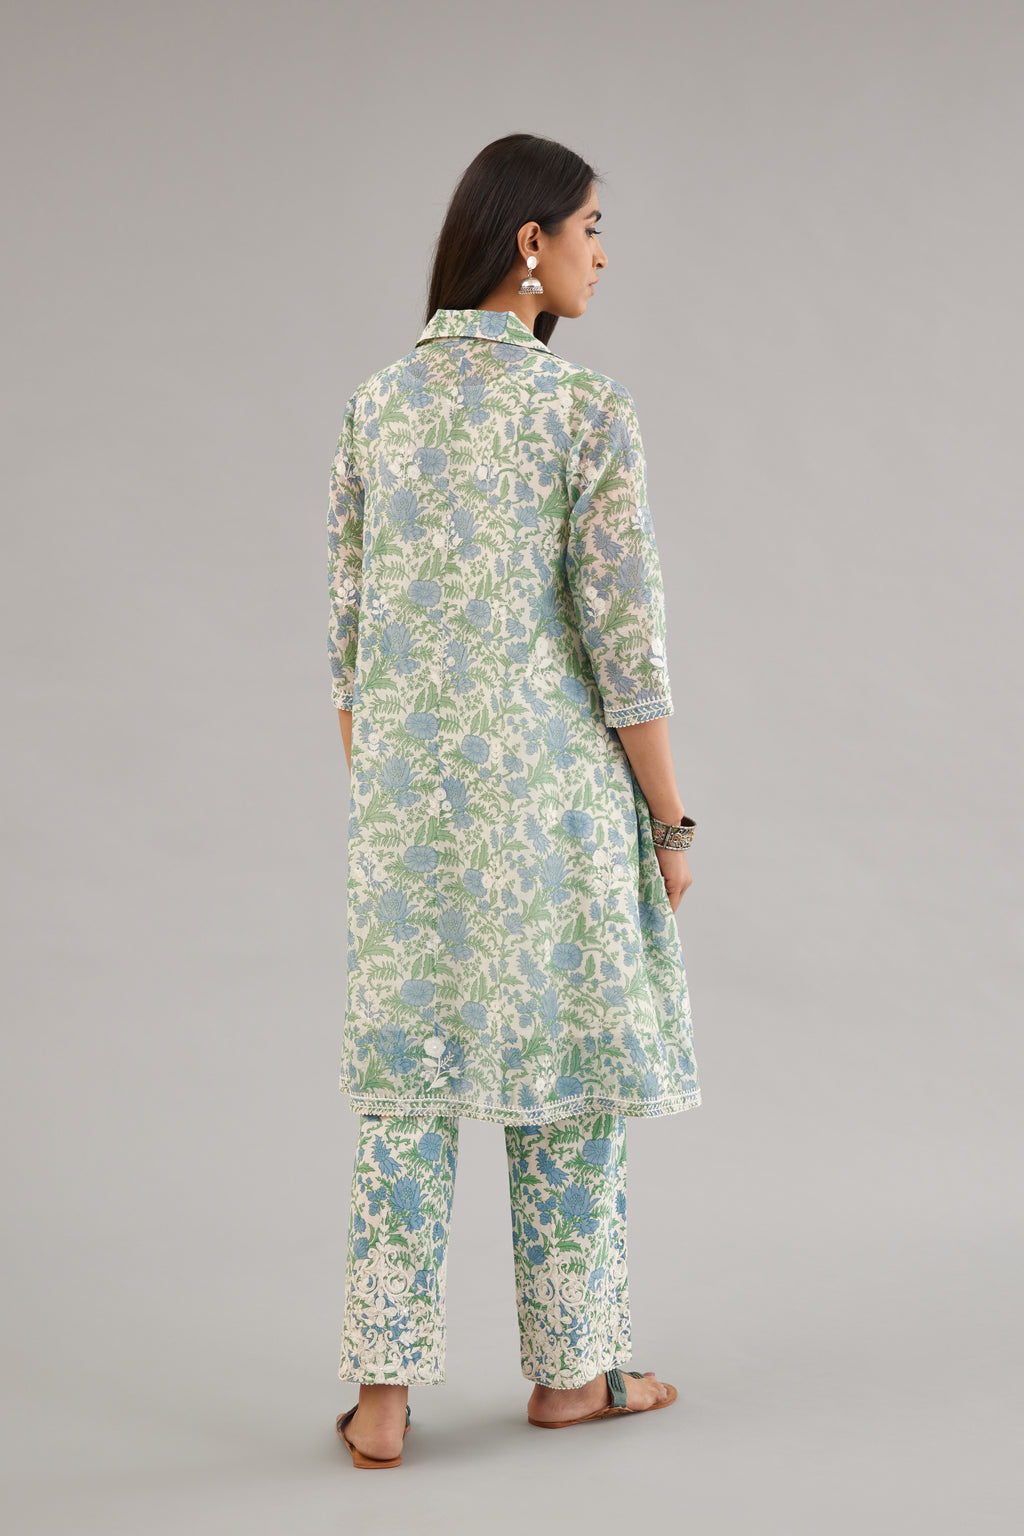 Blue & green hand block printed short kurta, paired with blue & green hand block printed cotton pants with dori embroidery at hem detailed with sequins work